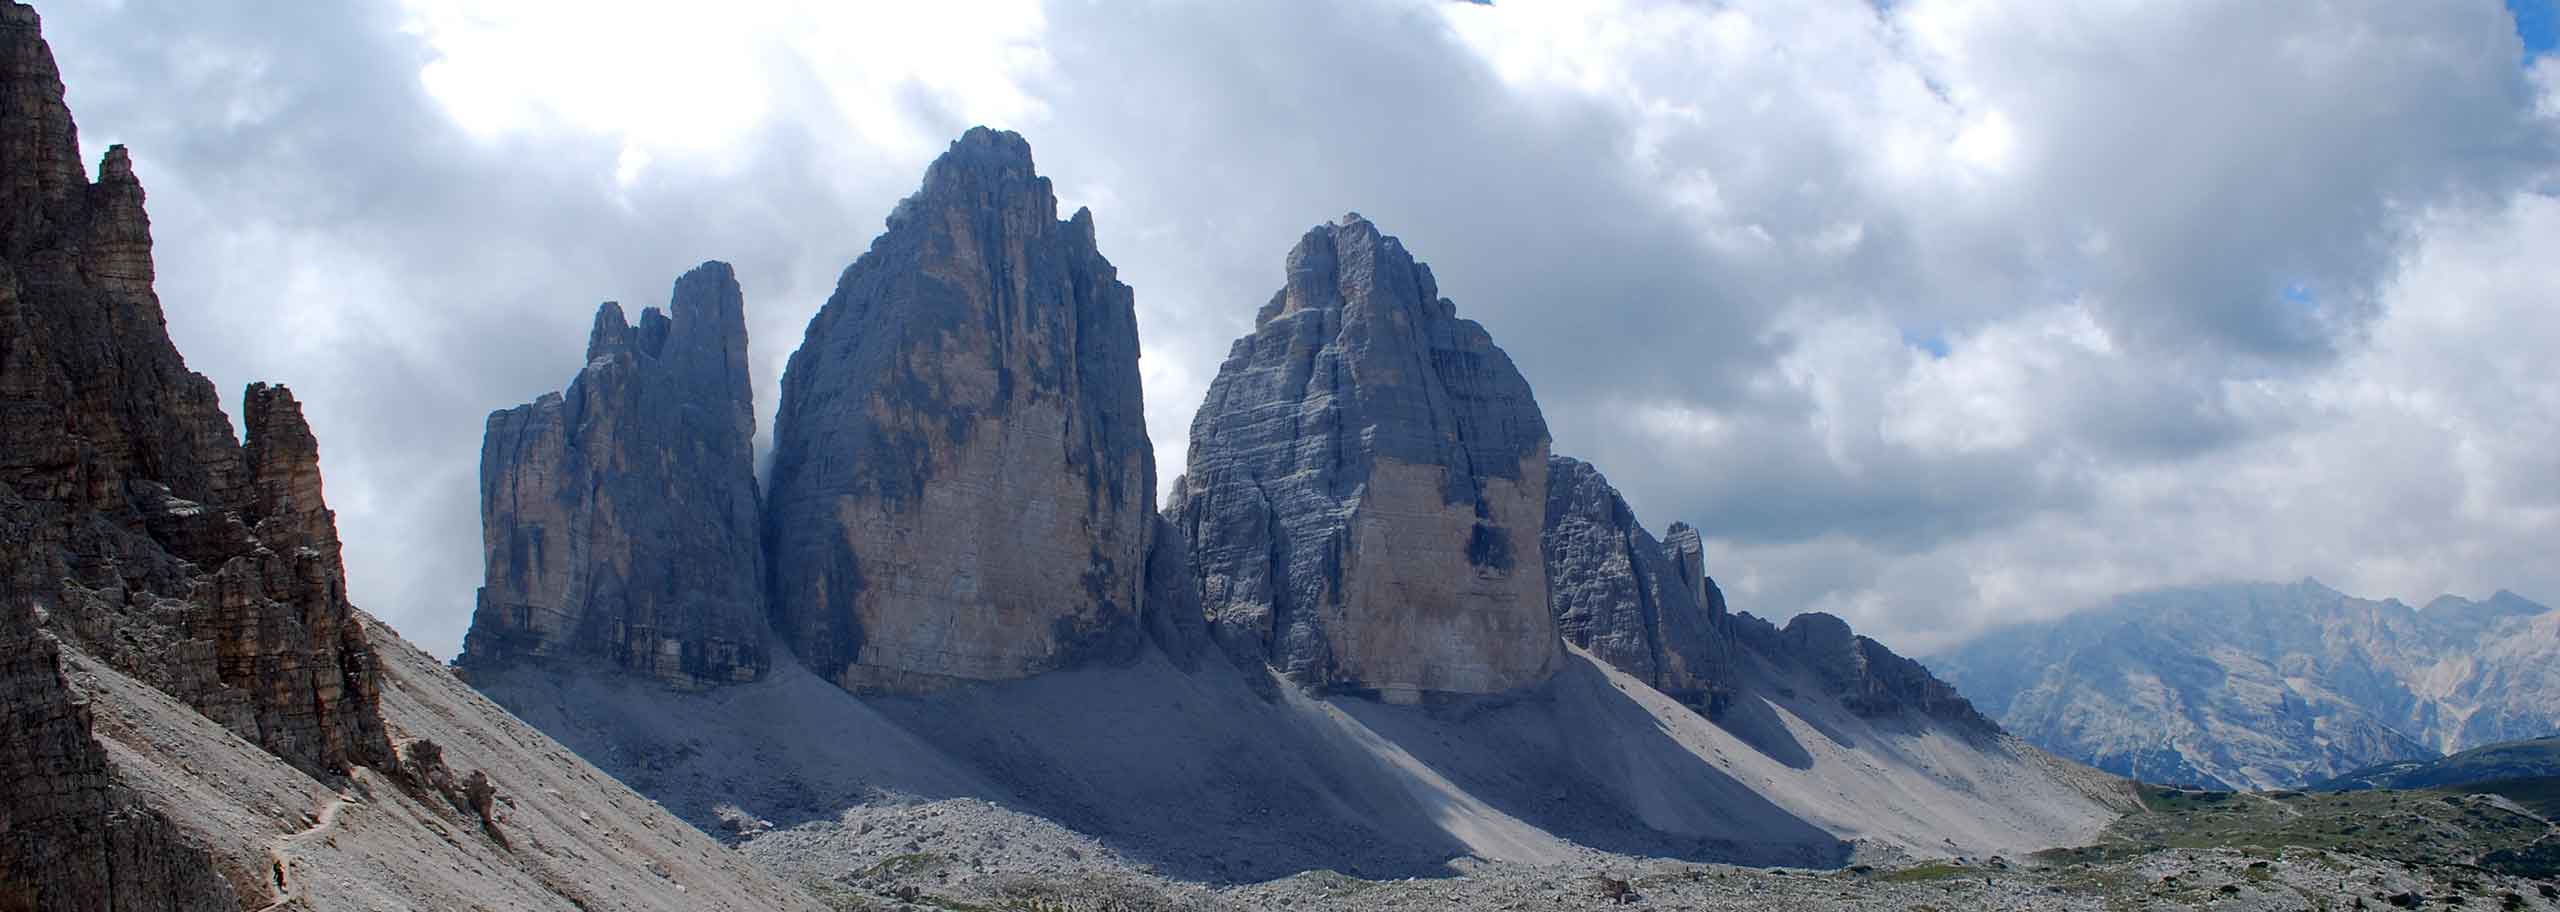 Hiking in Cortina d'Ampezzo, Guided Trekking Experience